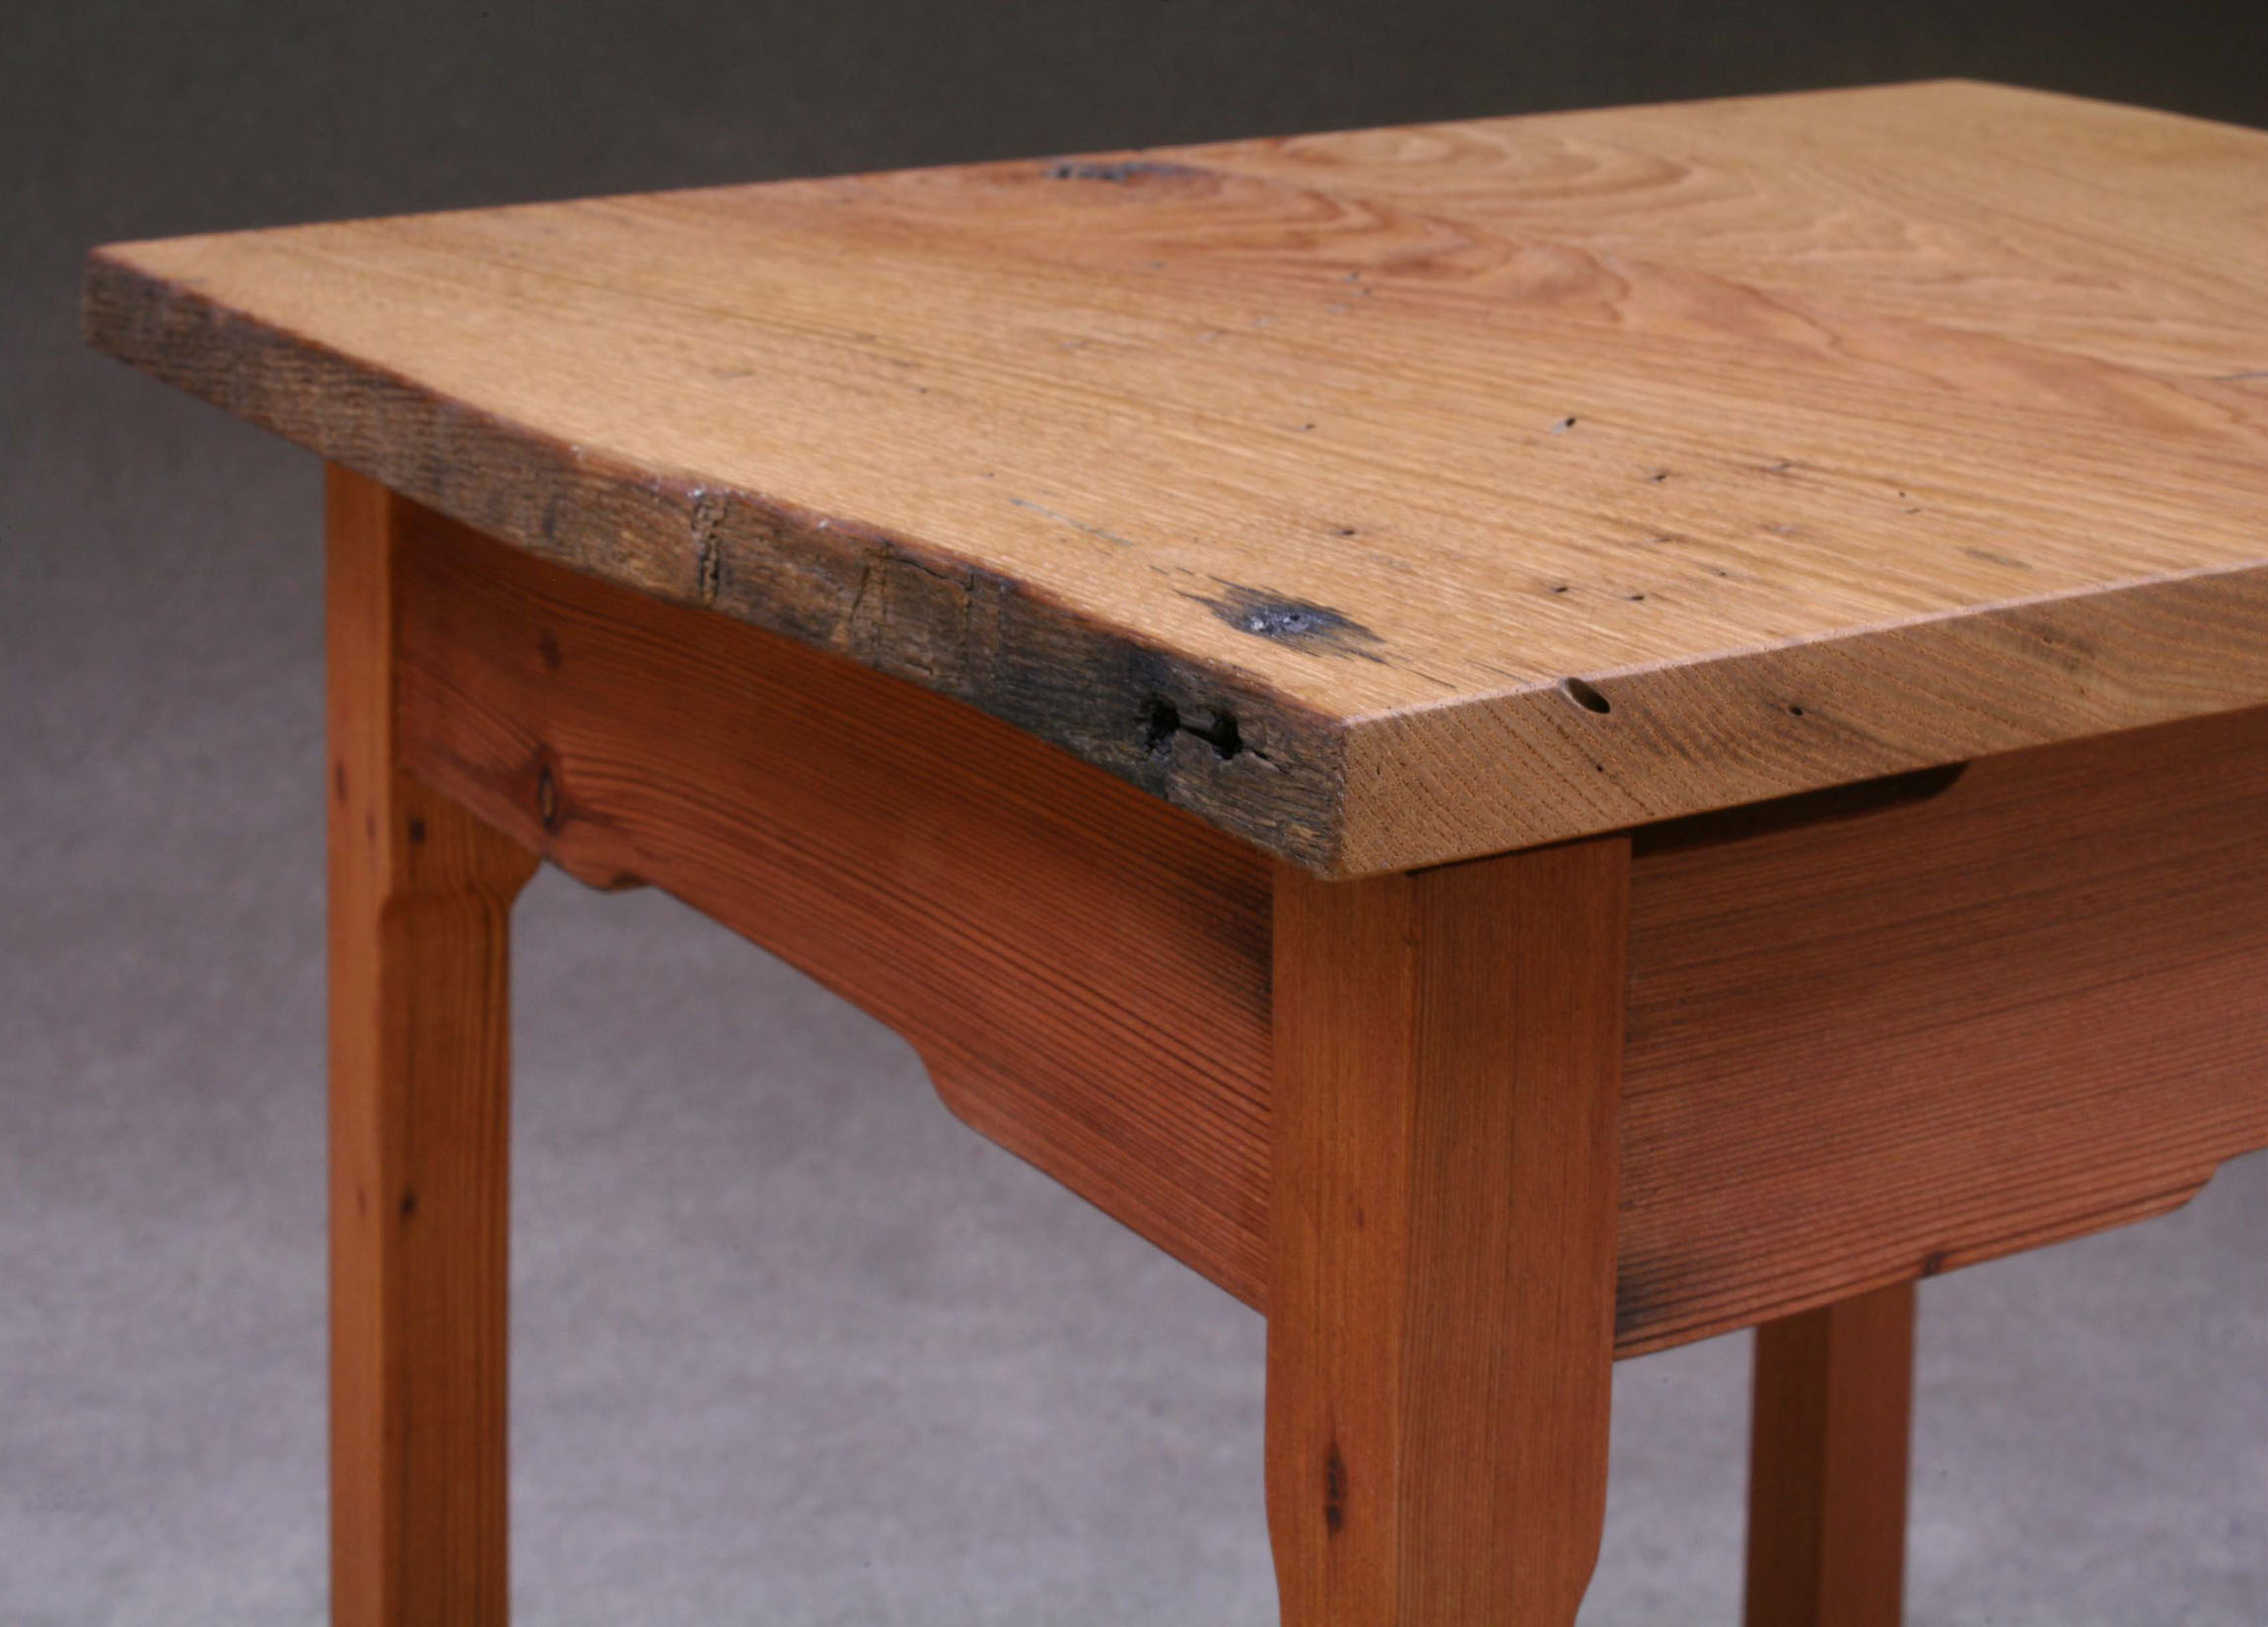 American Chestnut and Redwood End Table Closeup